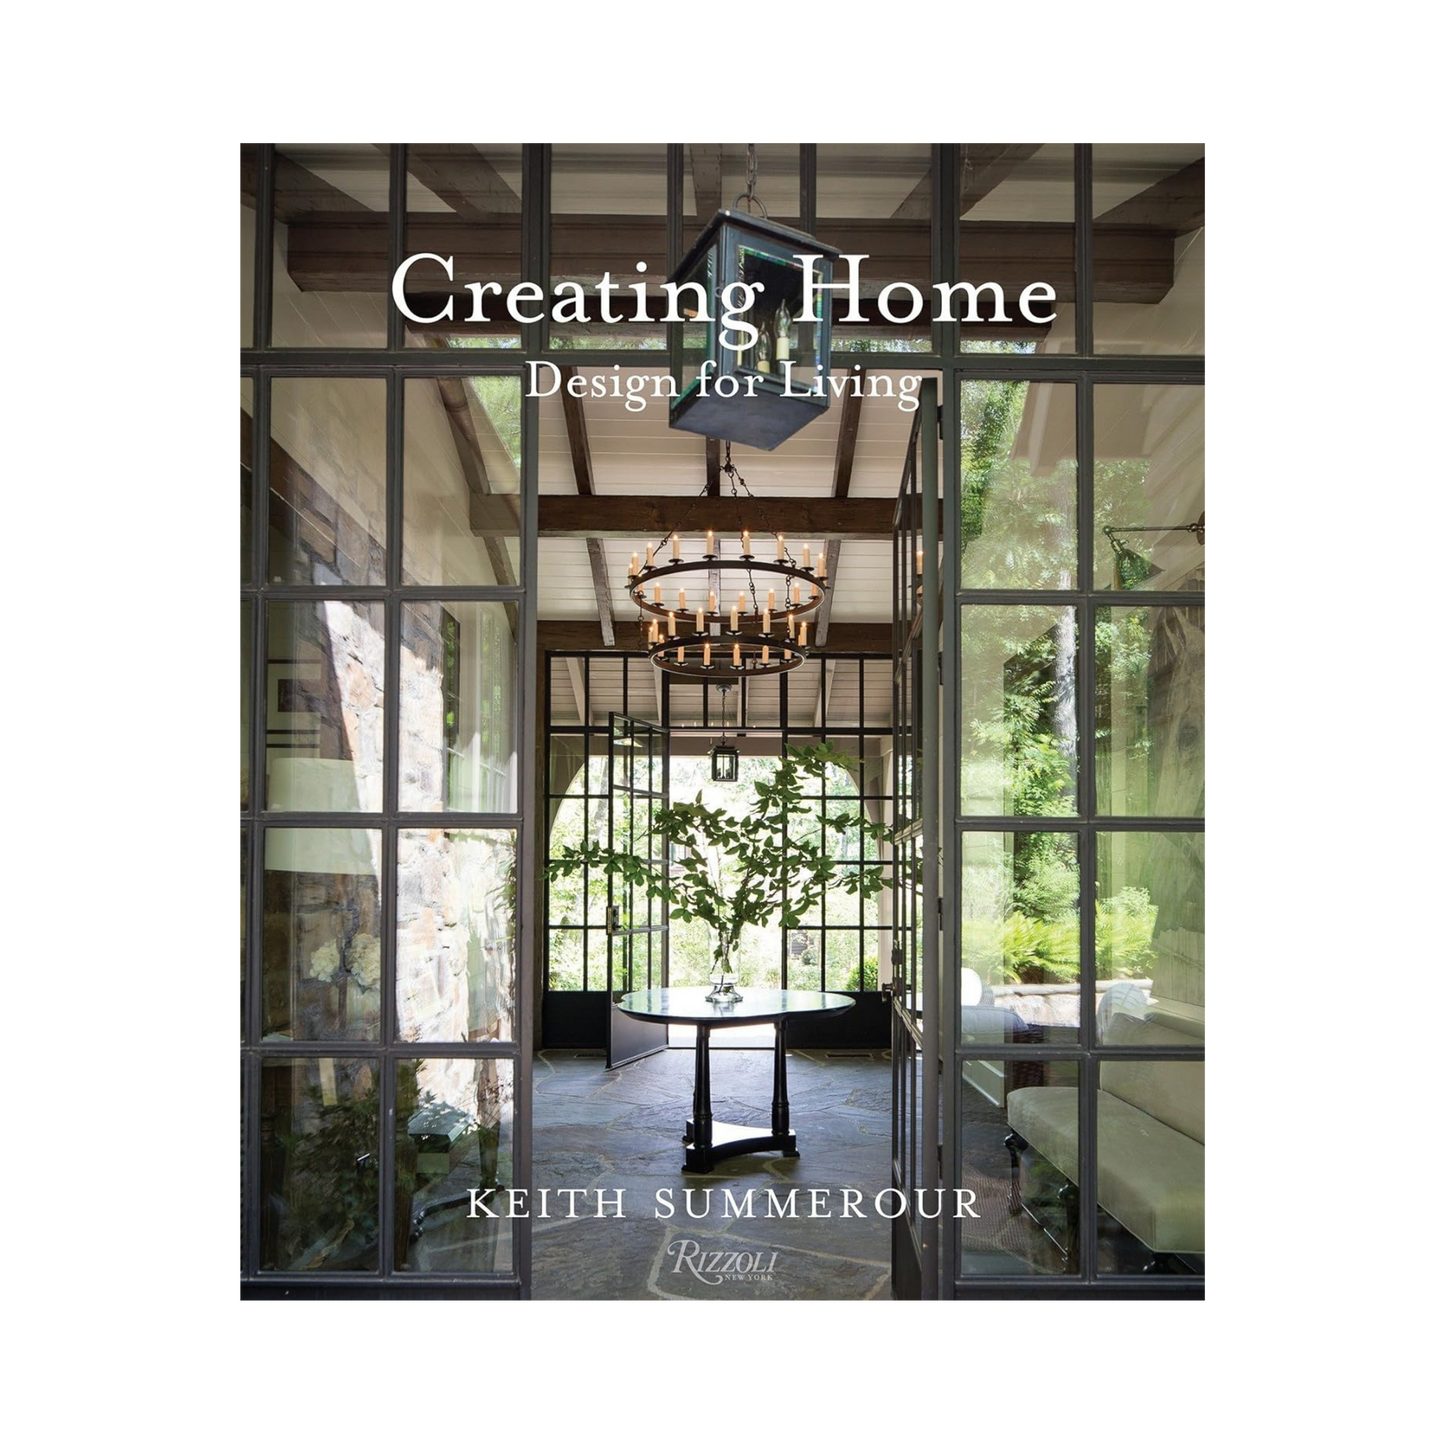 Creating Home by Keith Summerour